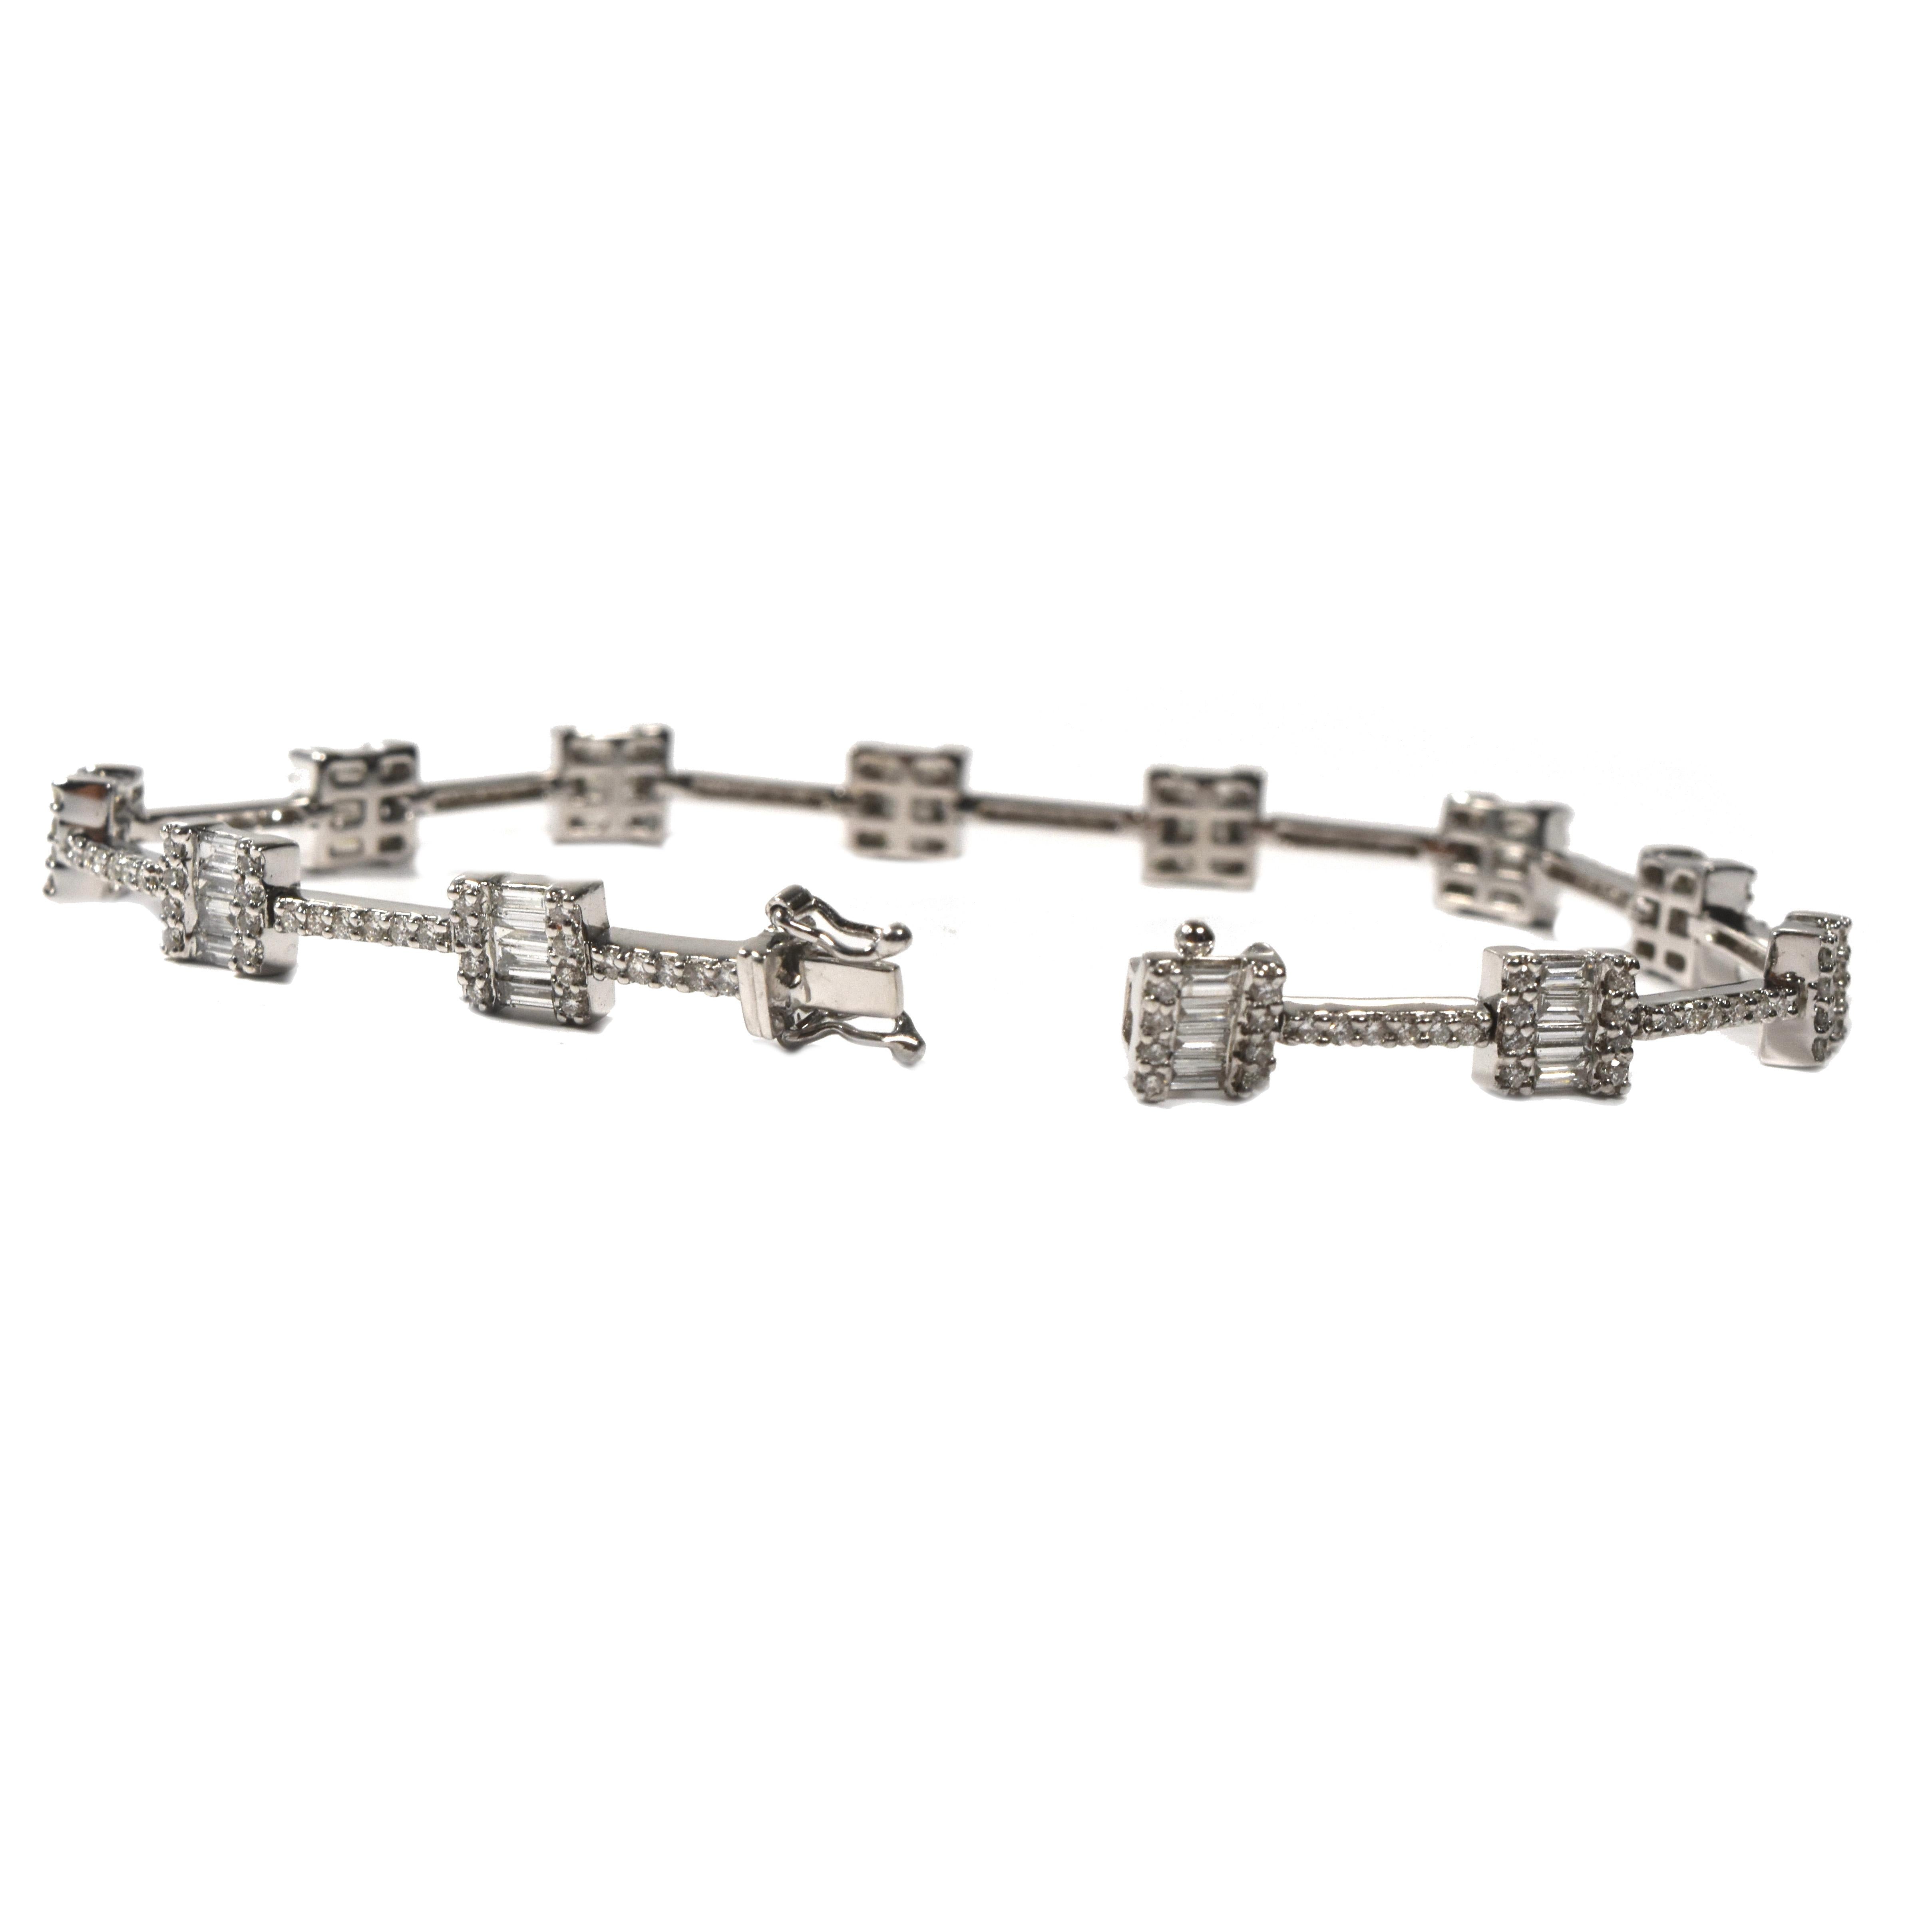 Very original and elegant tennis bracelet featuring a combination of round and baguette cut diamonds on 14k White Gold. The geometric shapes created by the variation of diamonds brings us back to the Art Deco era, where straight lines and strong